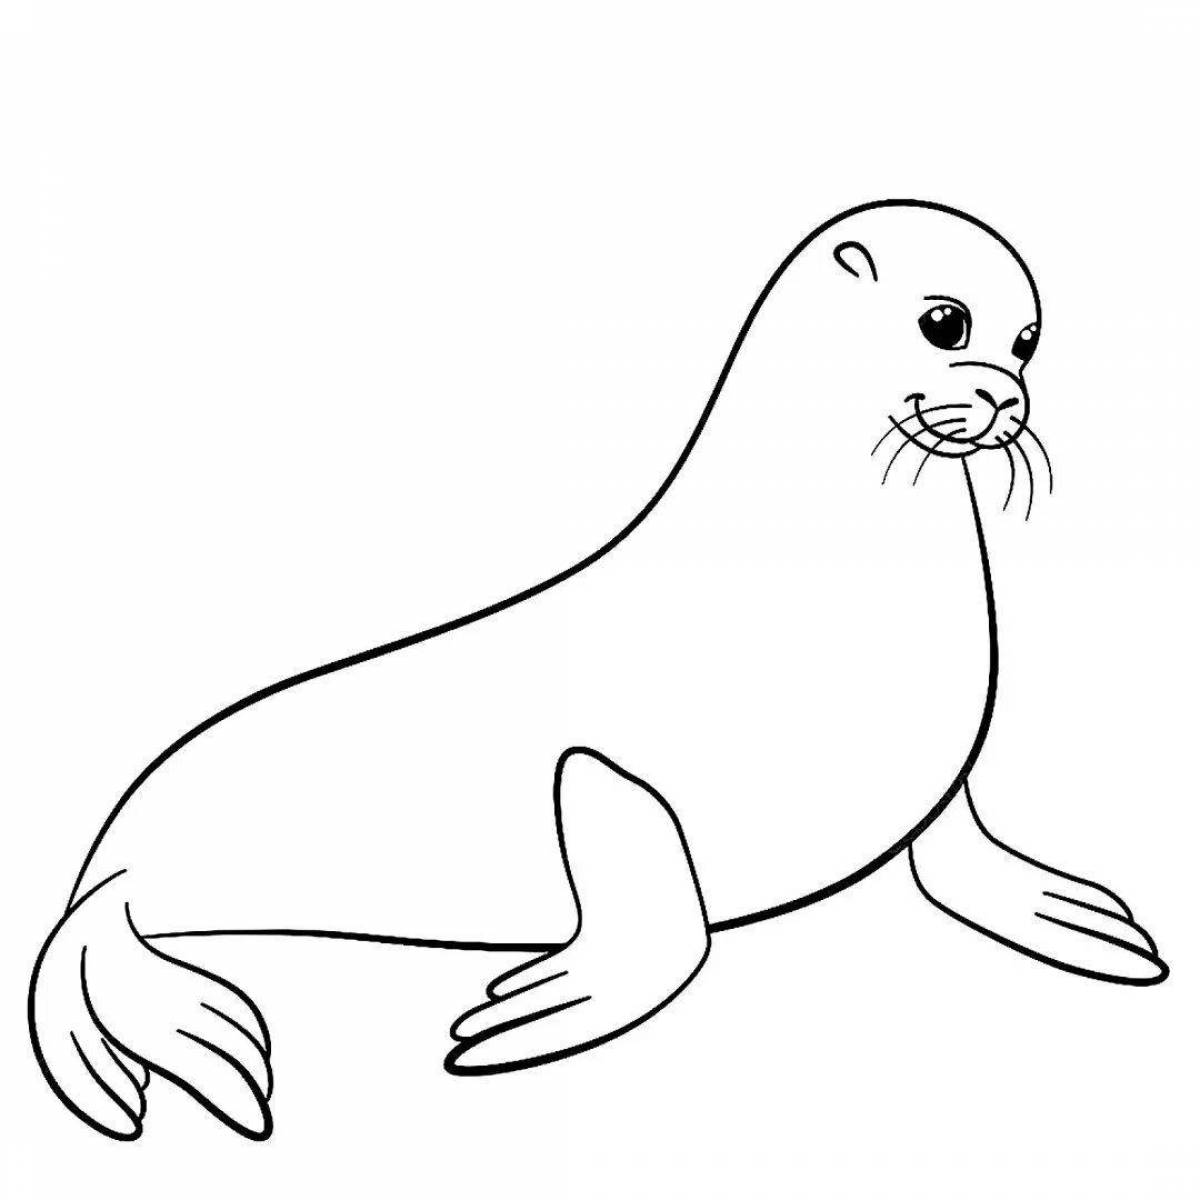 Adorable sea lion coloring page for kids